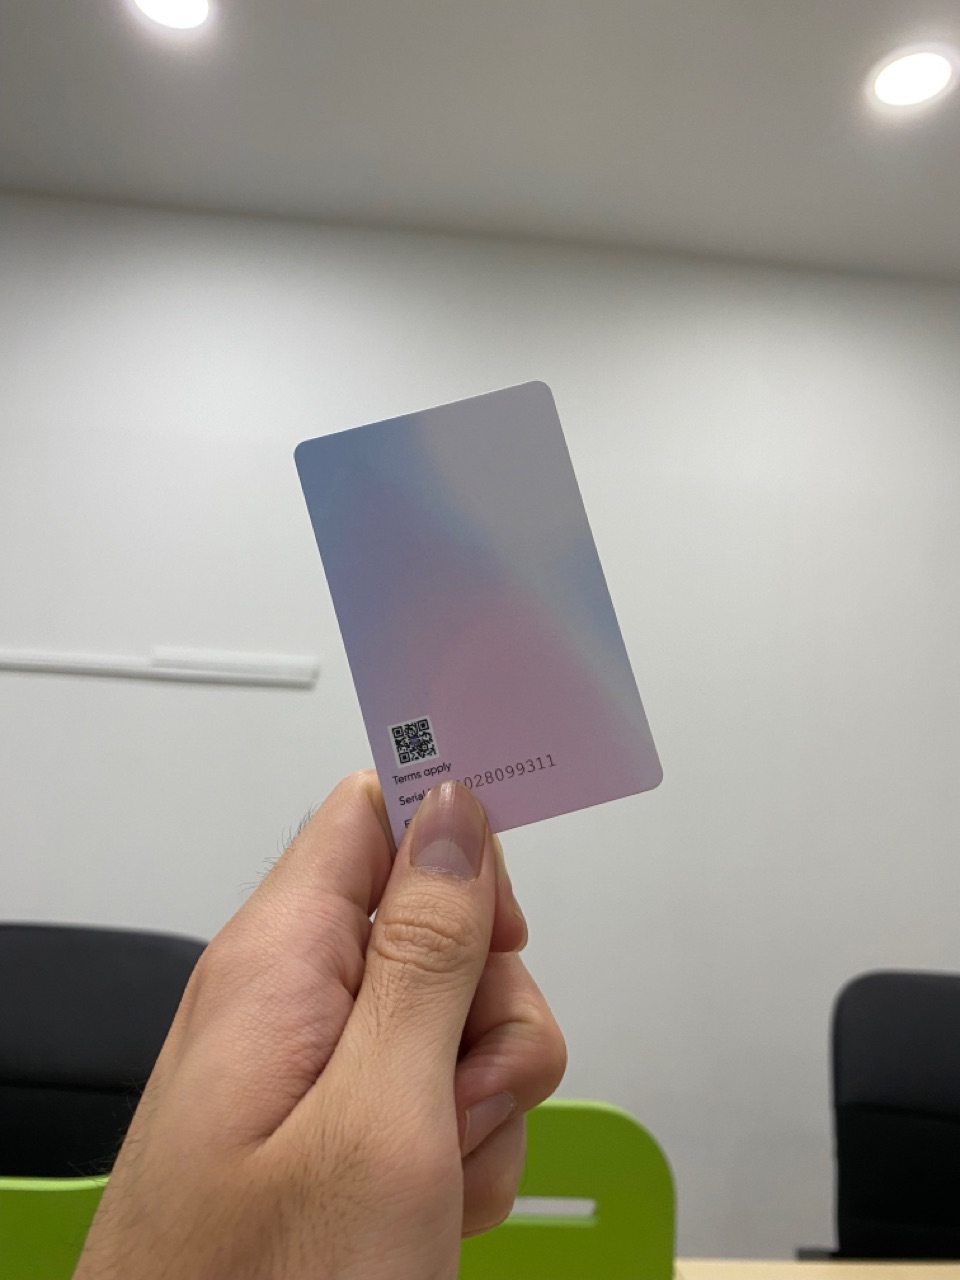 Touch 'n go nfc cards are now being sold at rm75 on carousell, m'sian gov't to take action against scalpers | weirdkaya